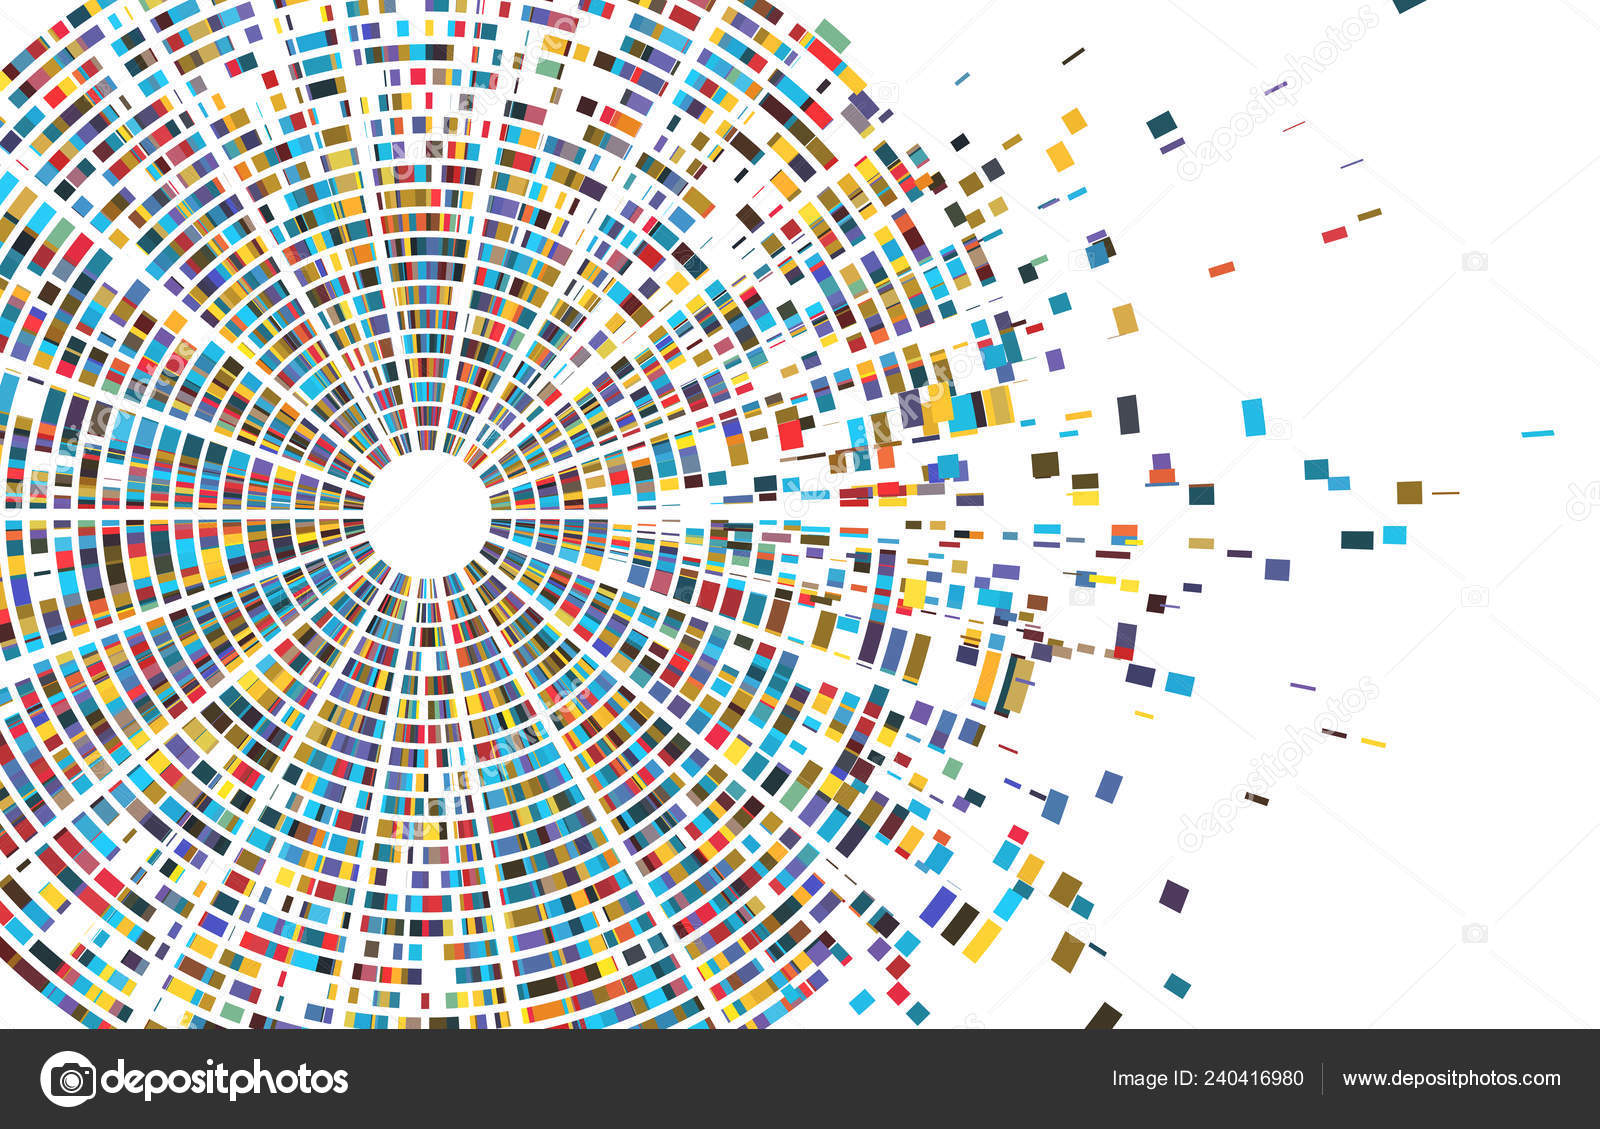 Dna test infographic. Genome sequence map, chromosome ...